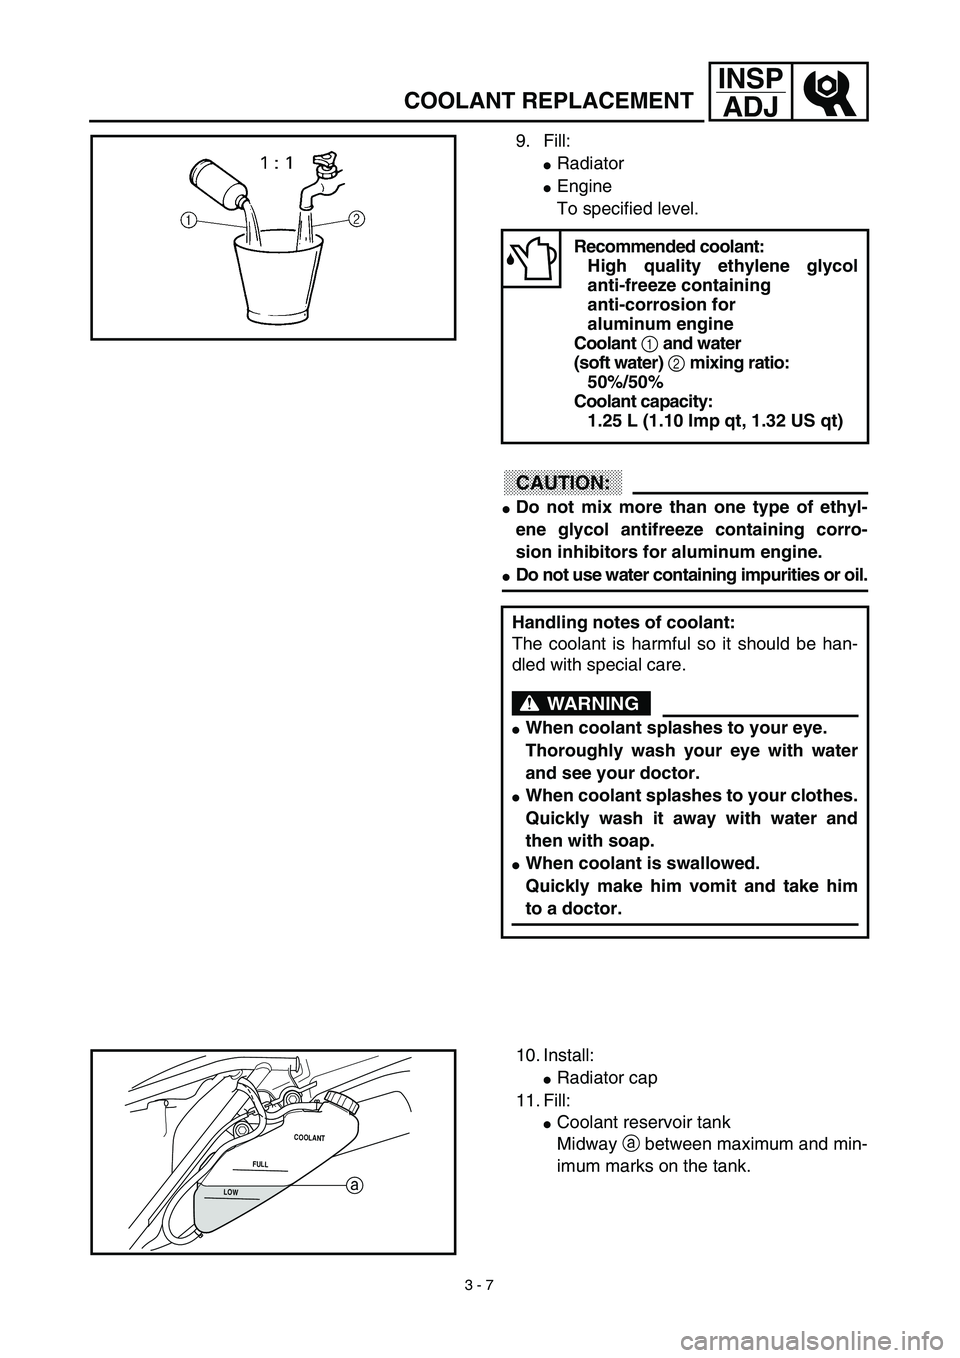 YAMAHA WR 450F 2003  Owners Manual 3 - 7
INSP
ADJ
COOLANT REPLACEMENT
9. Fill:
Radiator
Engine
To specified level.
CAUTION:
Do not mix more than one type of ethyl-
ene glycol antifreeze containing corro-
sion inhibitors for aluminum